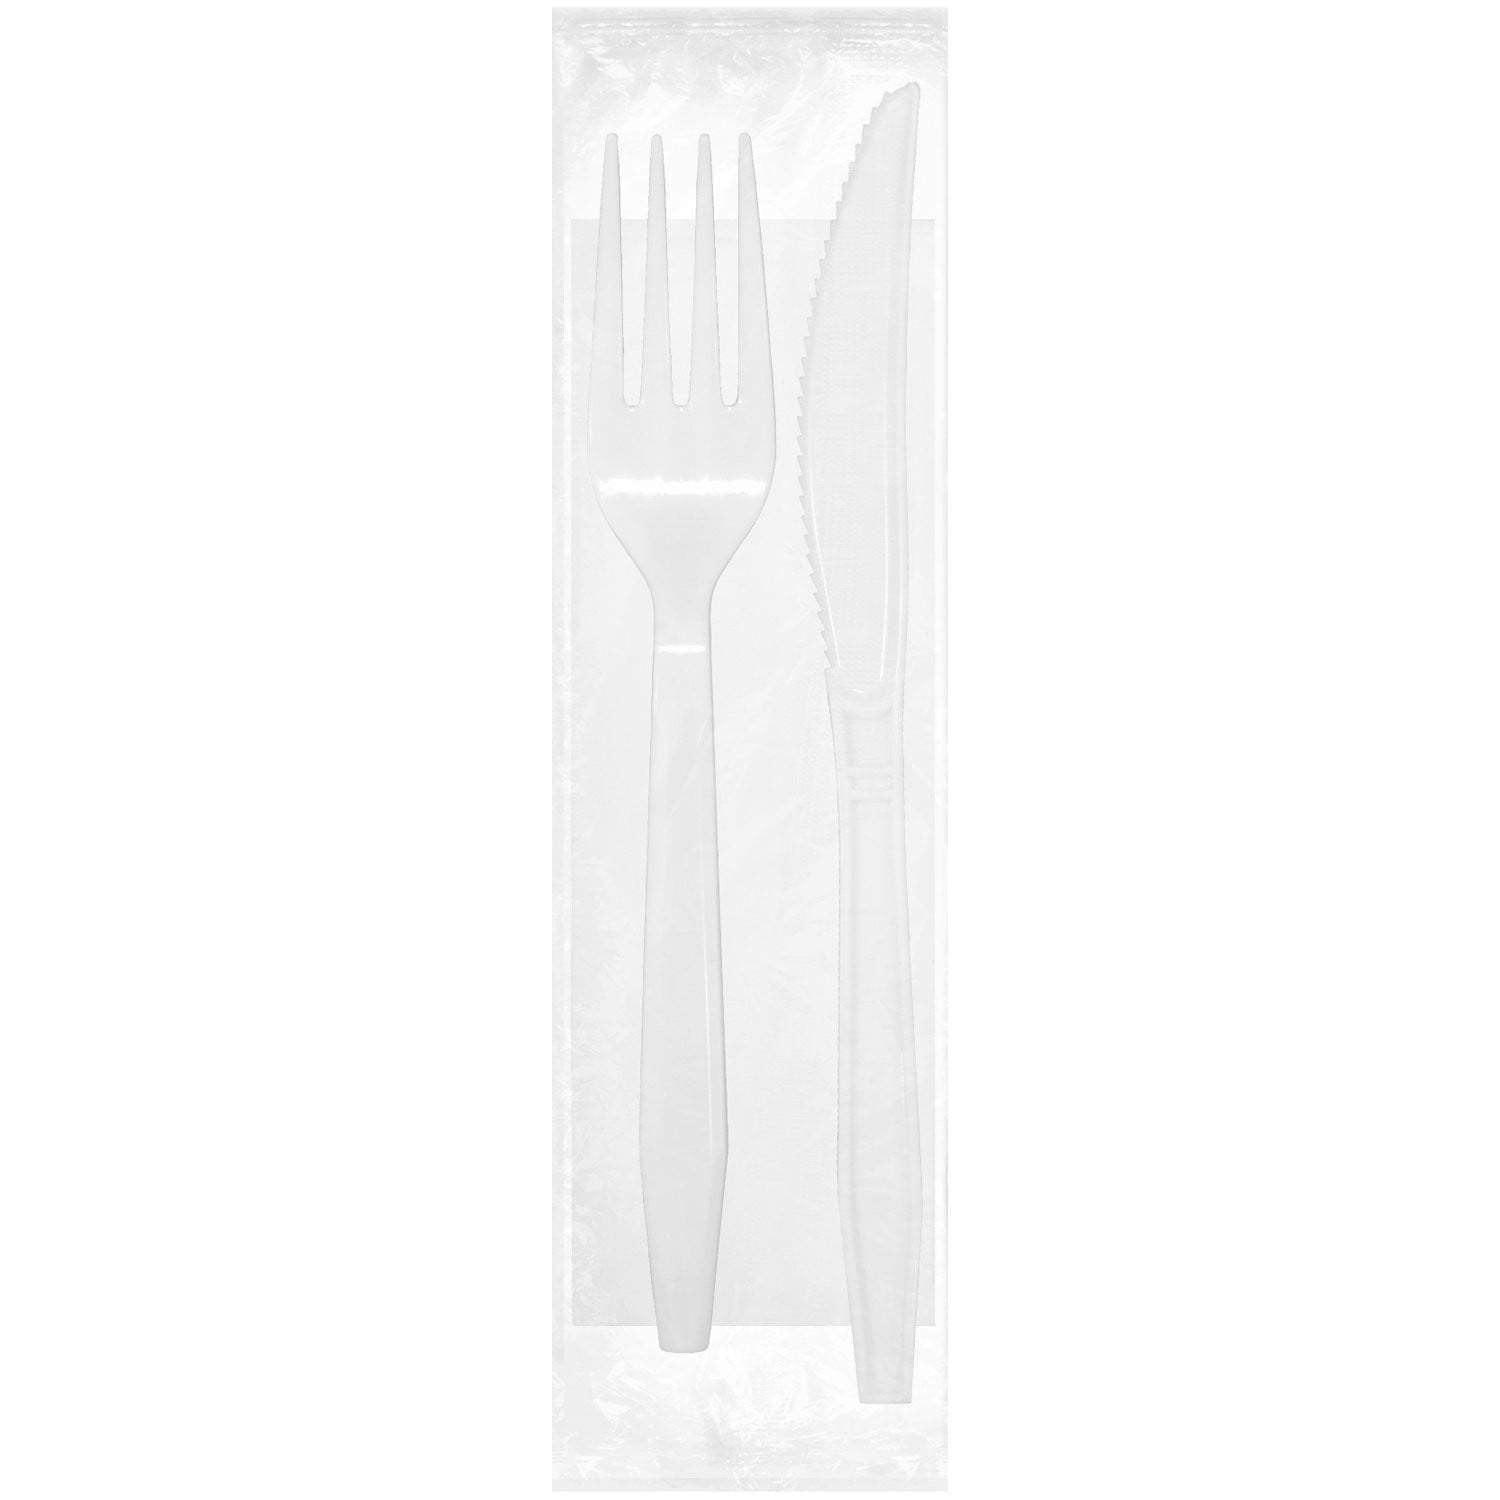 Bulk Pack 10 X Cutlery Plastic Knives White Or Clear – 10 Piece – Albatross  Wholesale